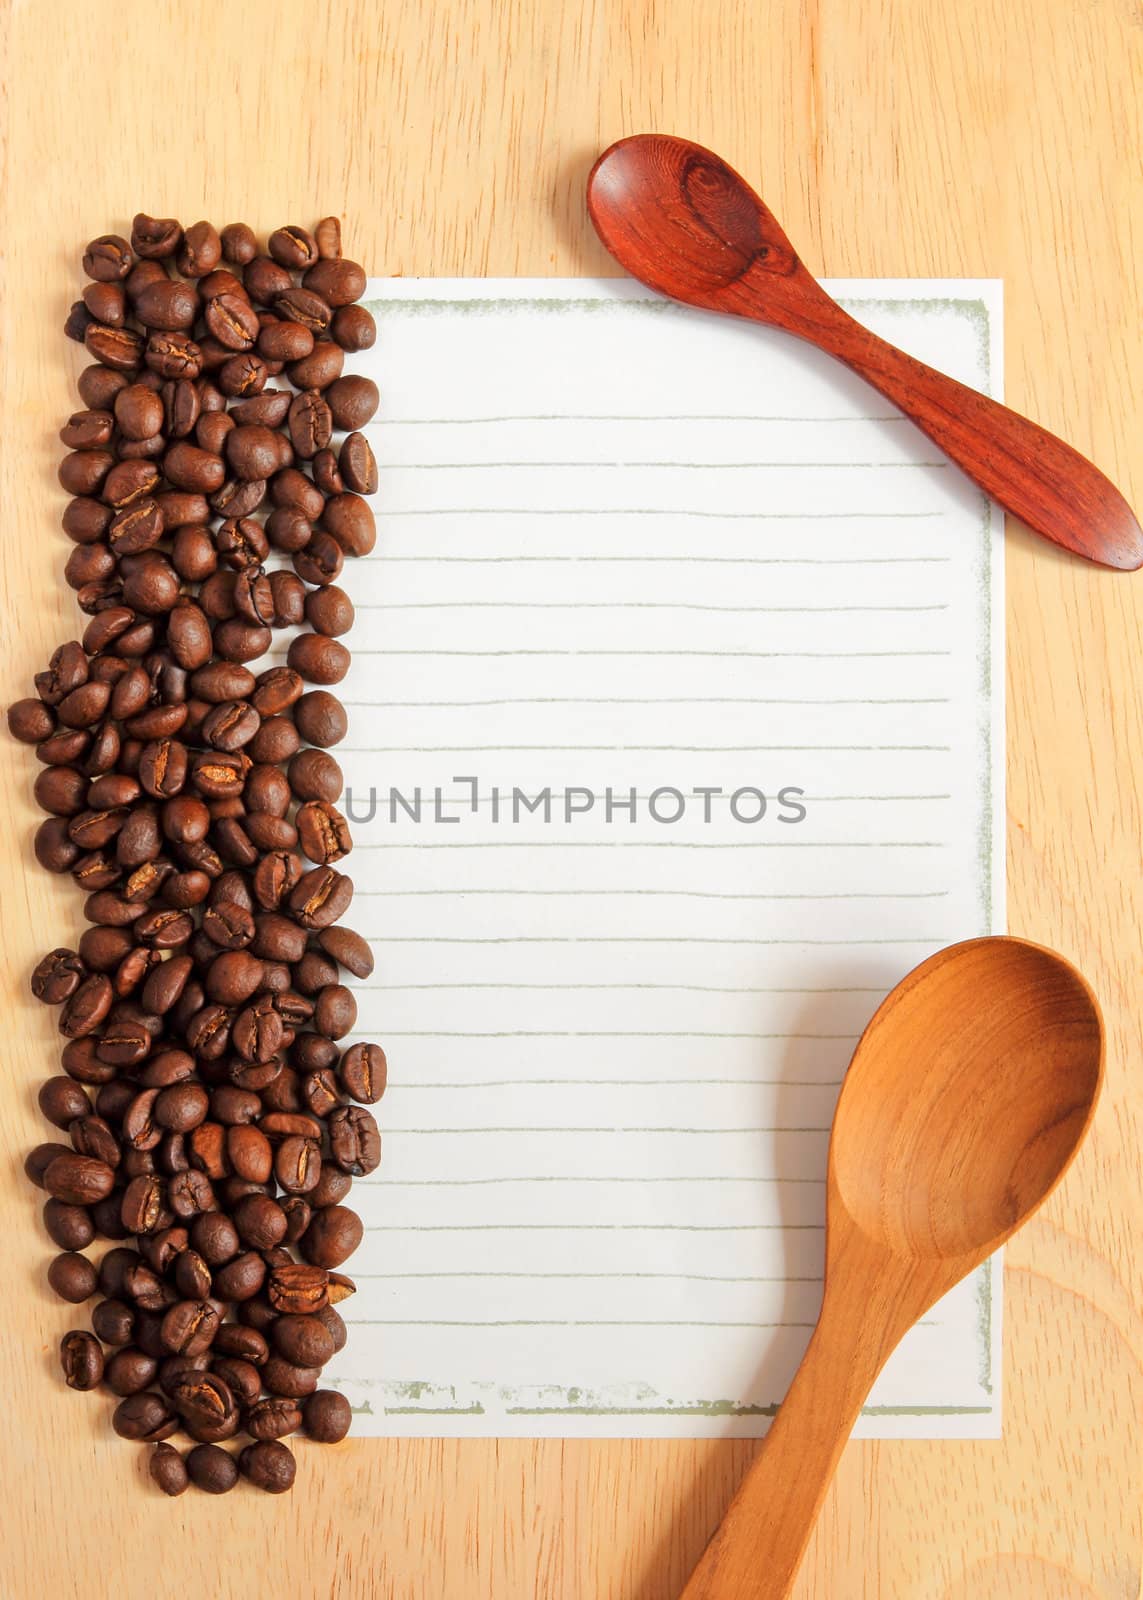 Coffee beans and spoon with paper for notes on the wooden backgr by nuchylee